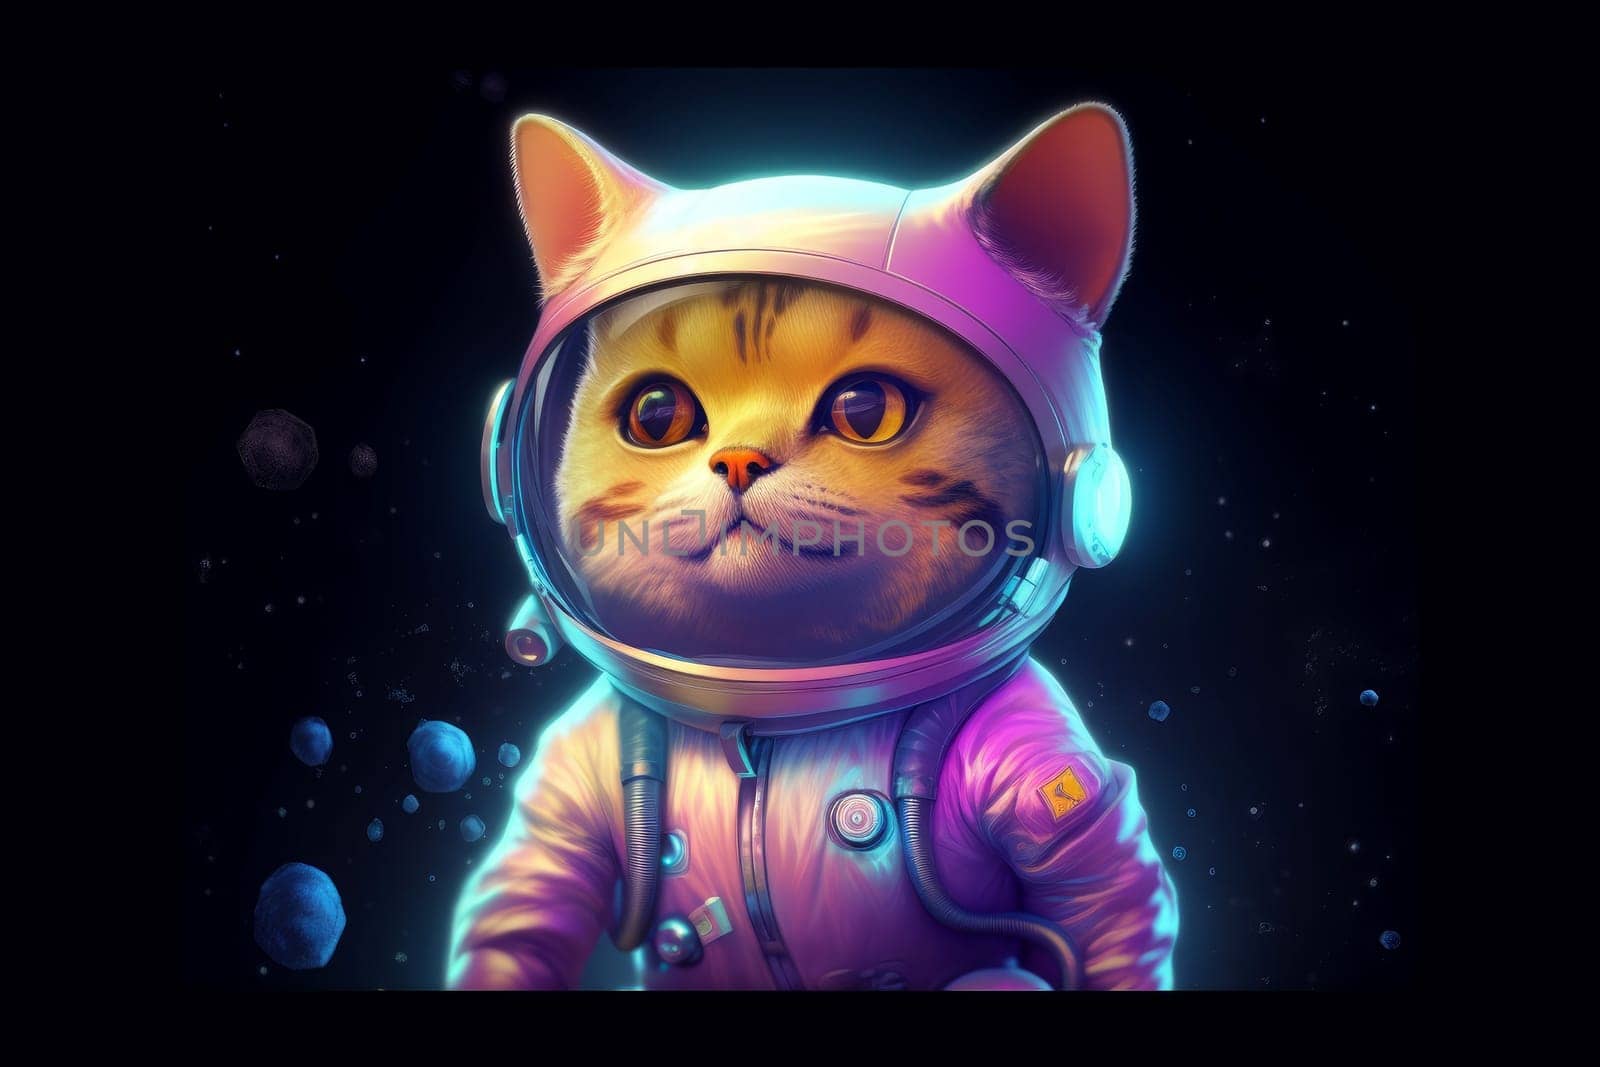 Smiling cat in space suit. Animal love art by ylivdesign